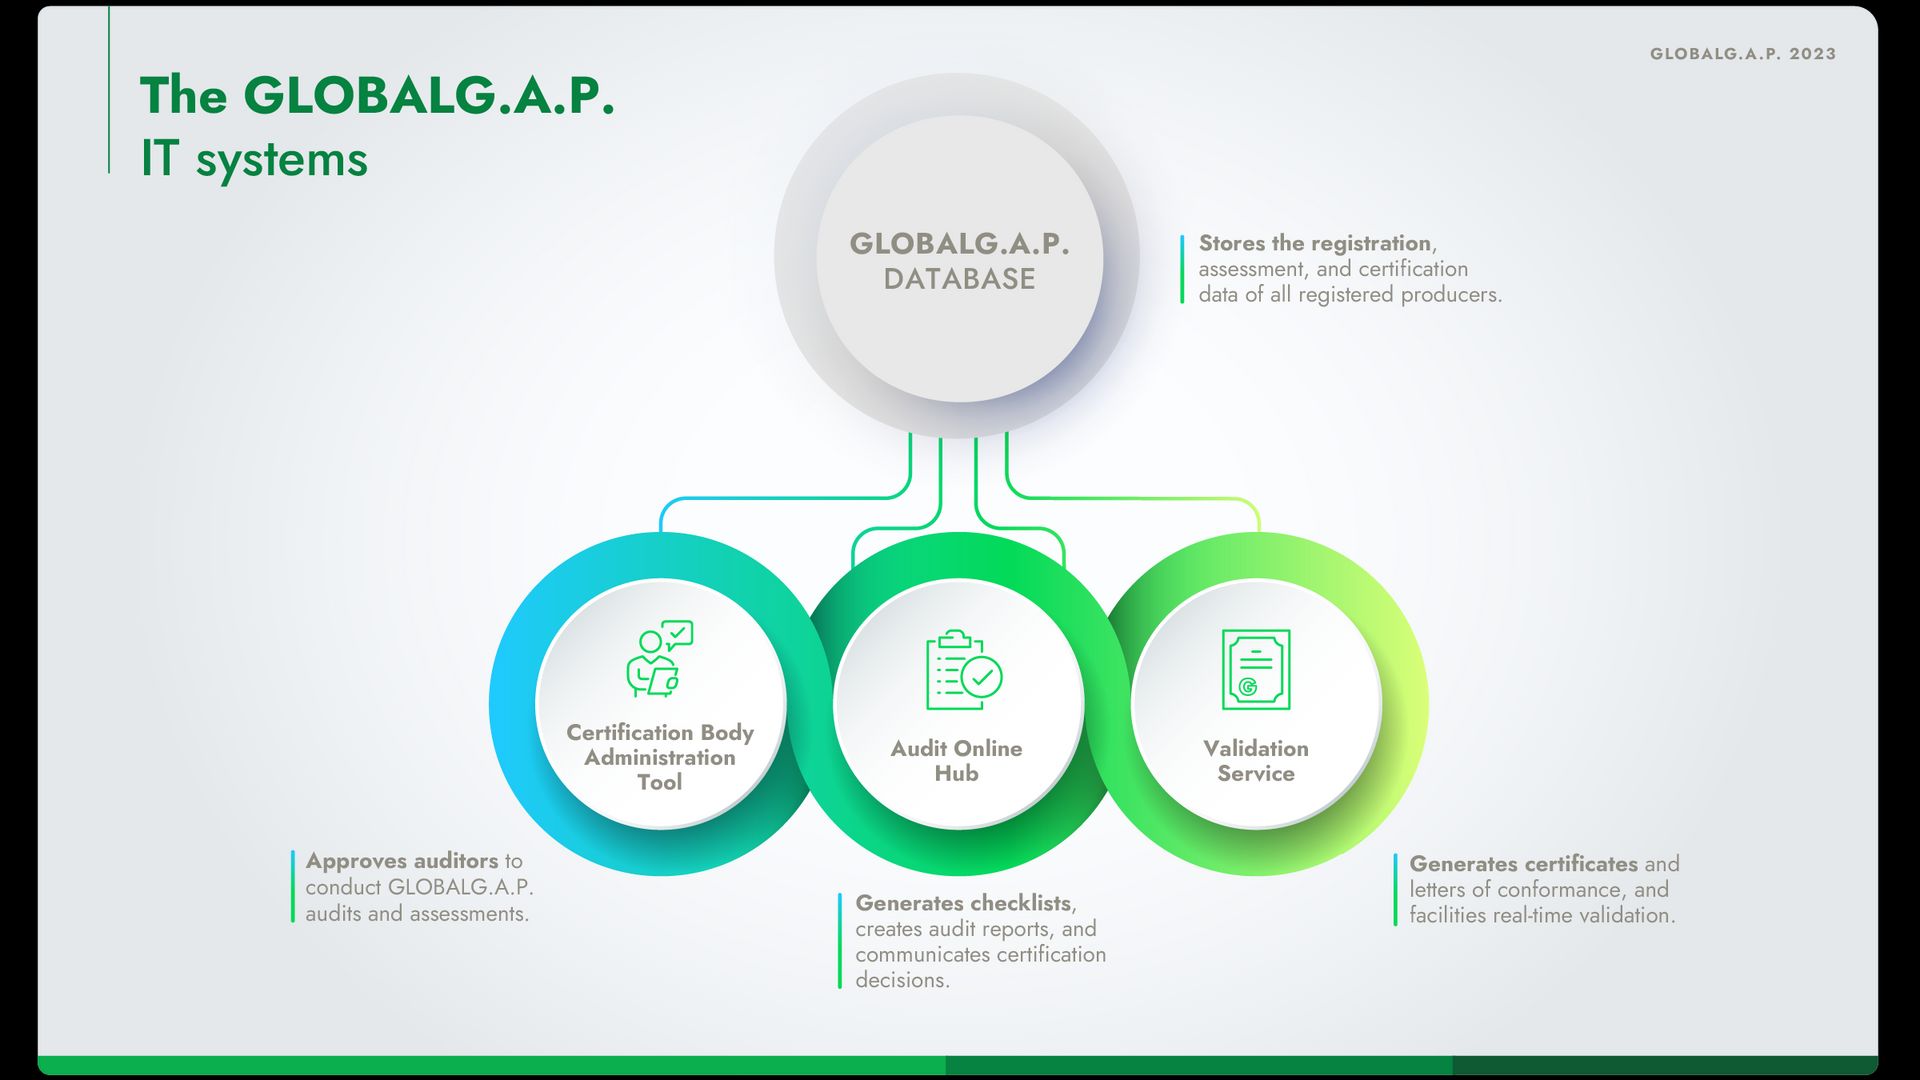 Infographic showing the interaction between the GLOBALG.A.P. IT systems